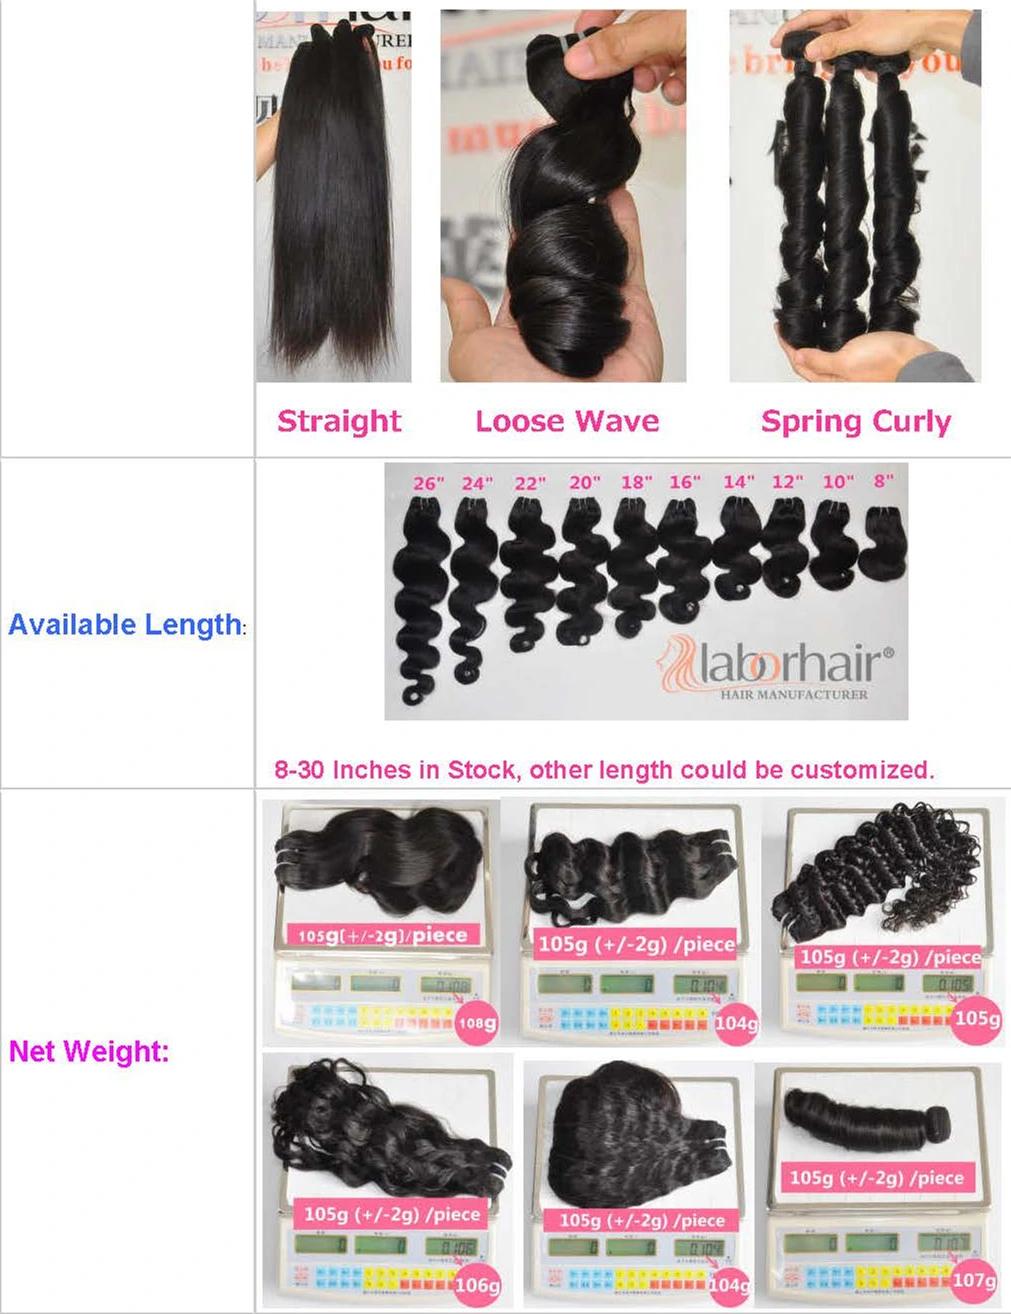 100% Human Hair Extension Natural Indian Virgin Hair Weave, Little-Known Secret Weapons for Business to Reach Double Profit (LBH001)